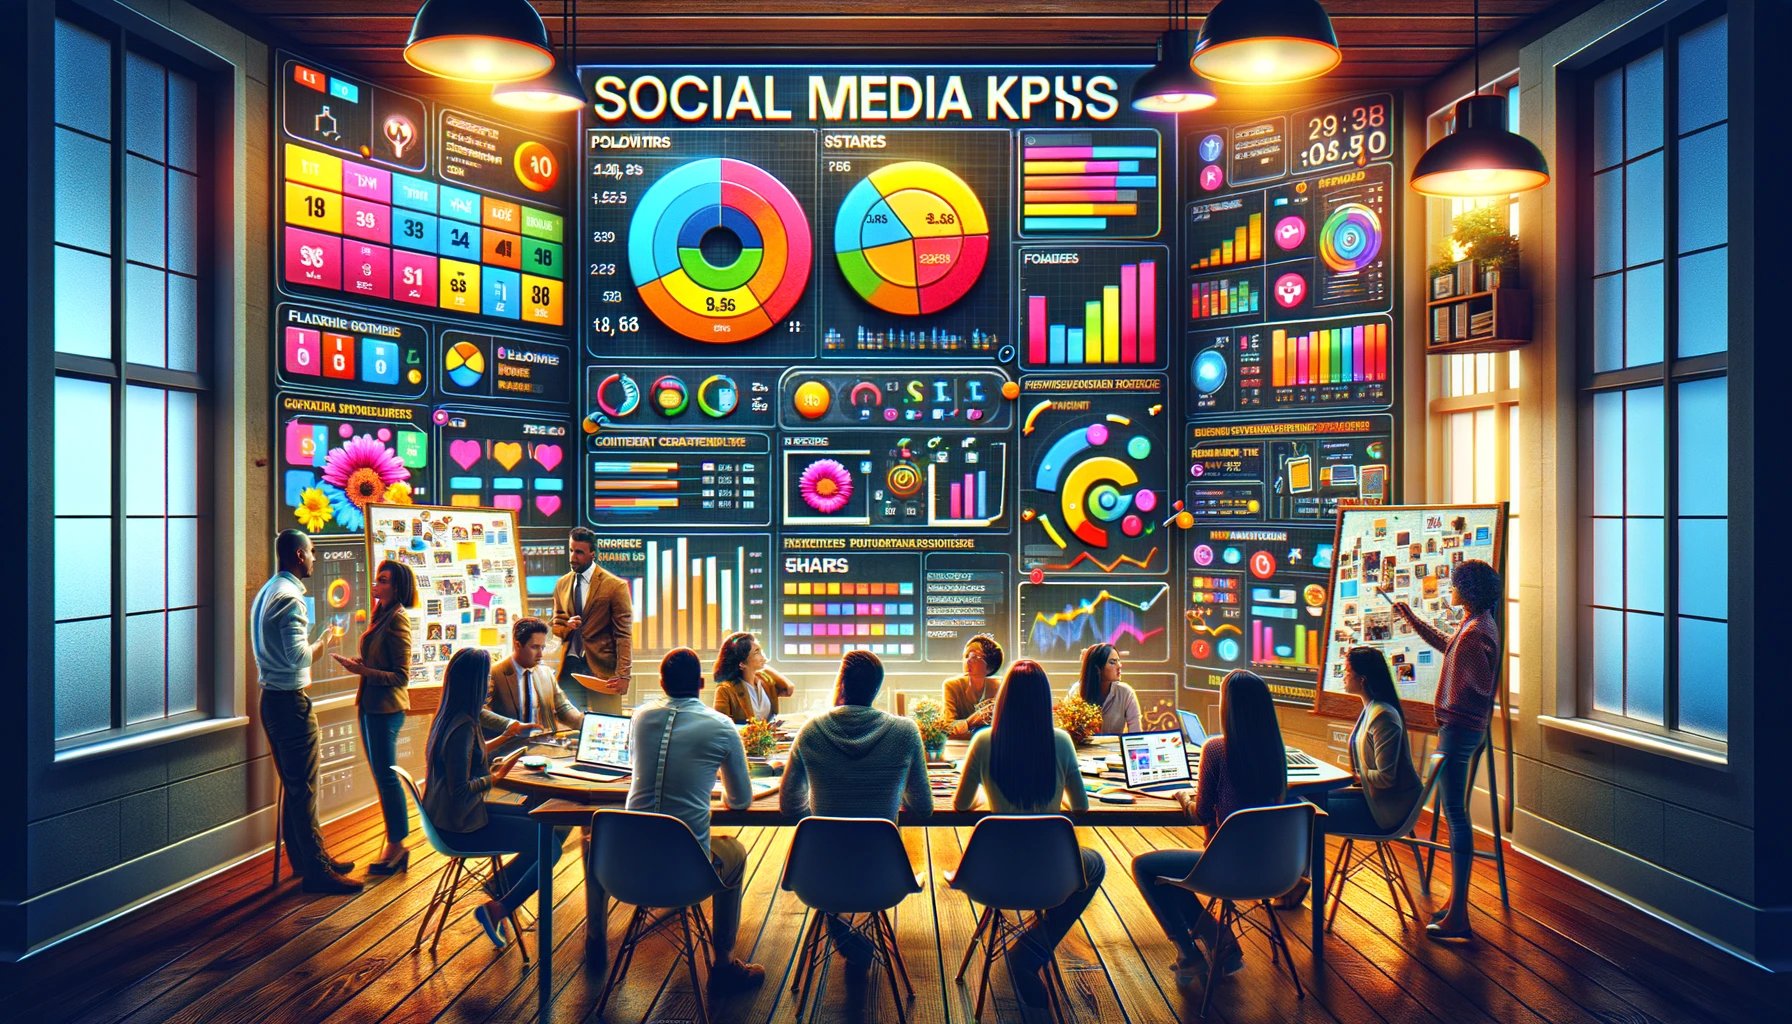 DALL·E 2024-04-11 12.10.06 - For the Social Media KPIs image, create a scene set in a vibrant, creative agency environment. A large, colorful dashboard dominates the space, displa